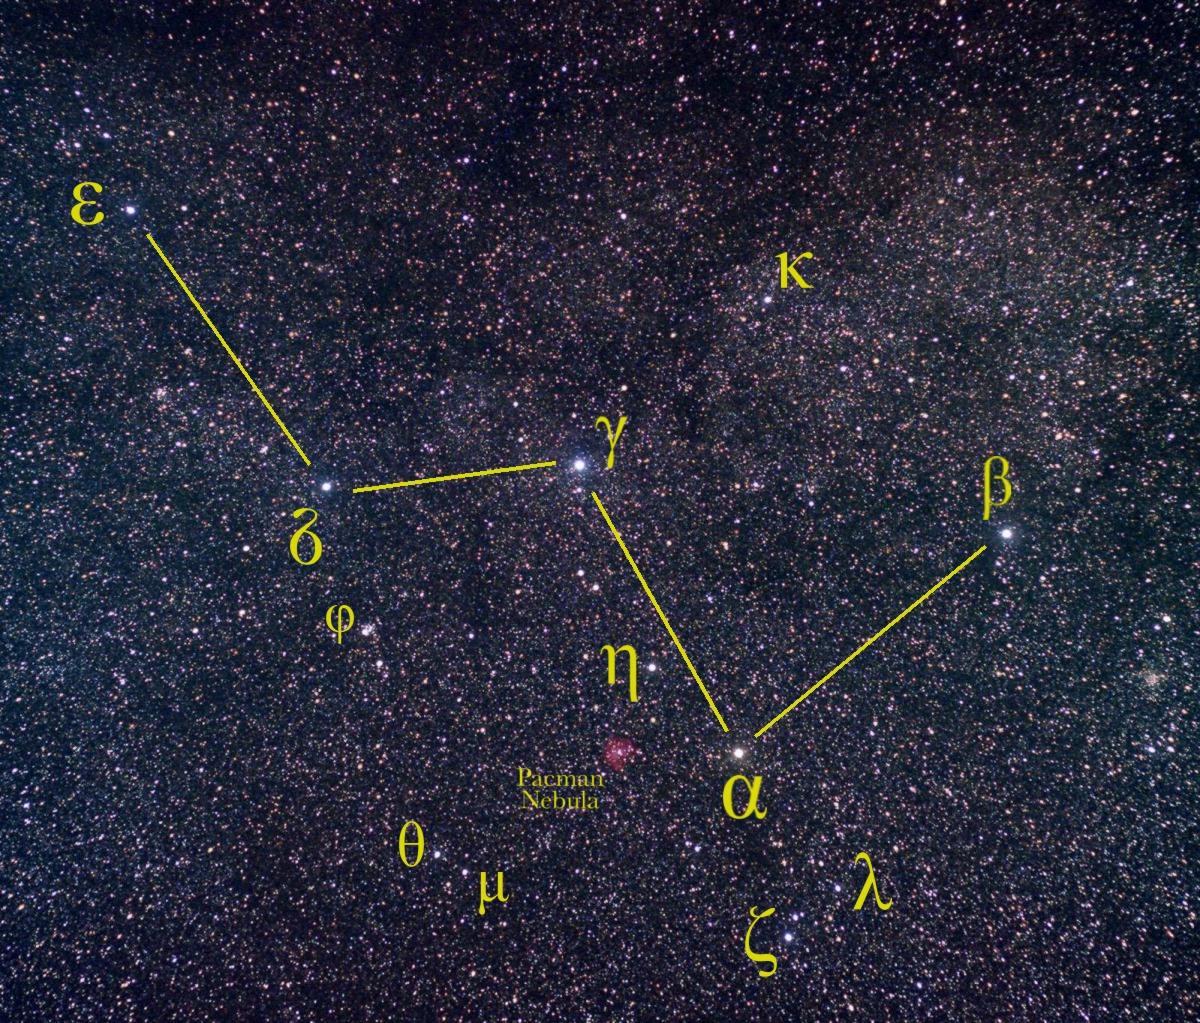 Cassiopeia is shown with lines connecting the stars.